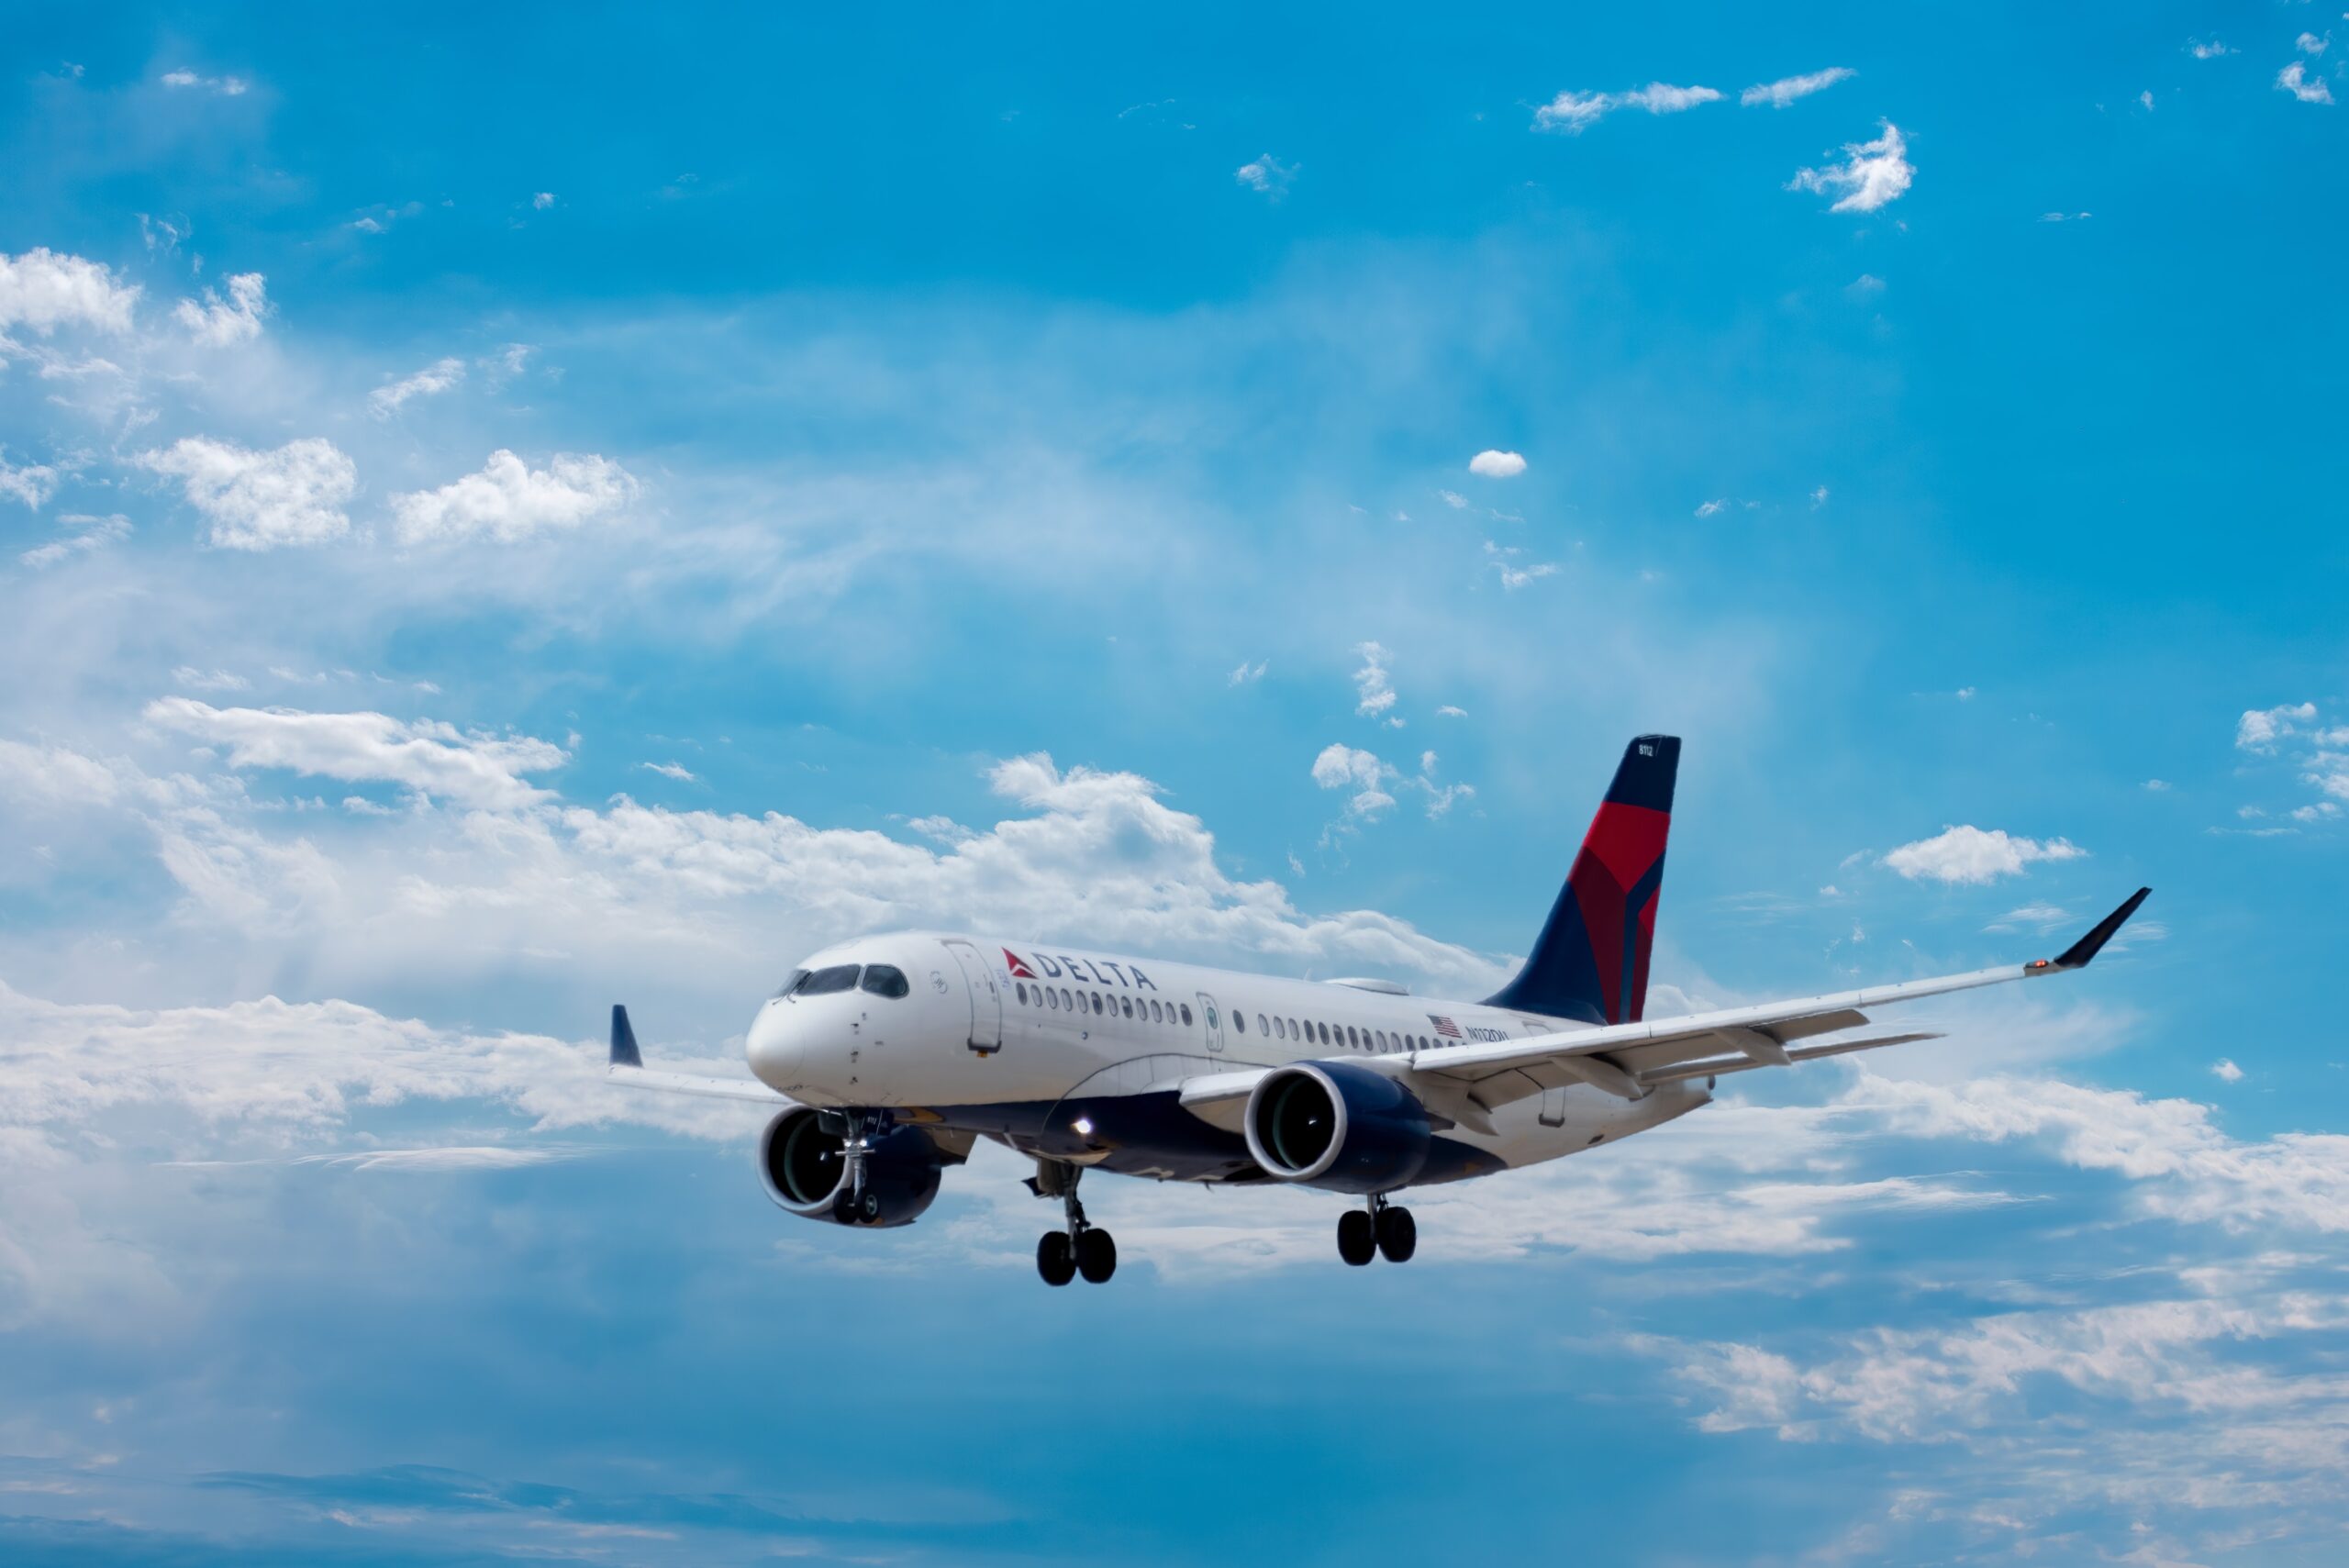 What 3 cities will Delta no longer fly to?